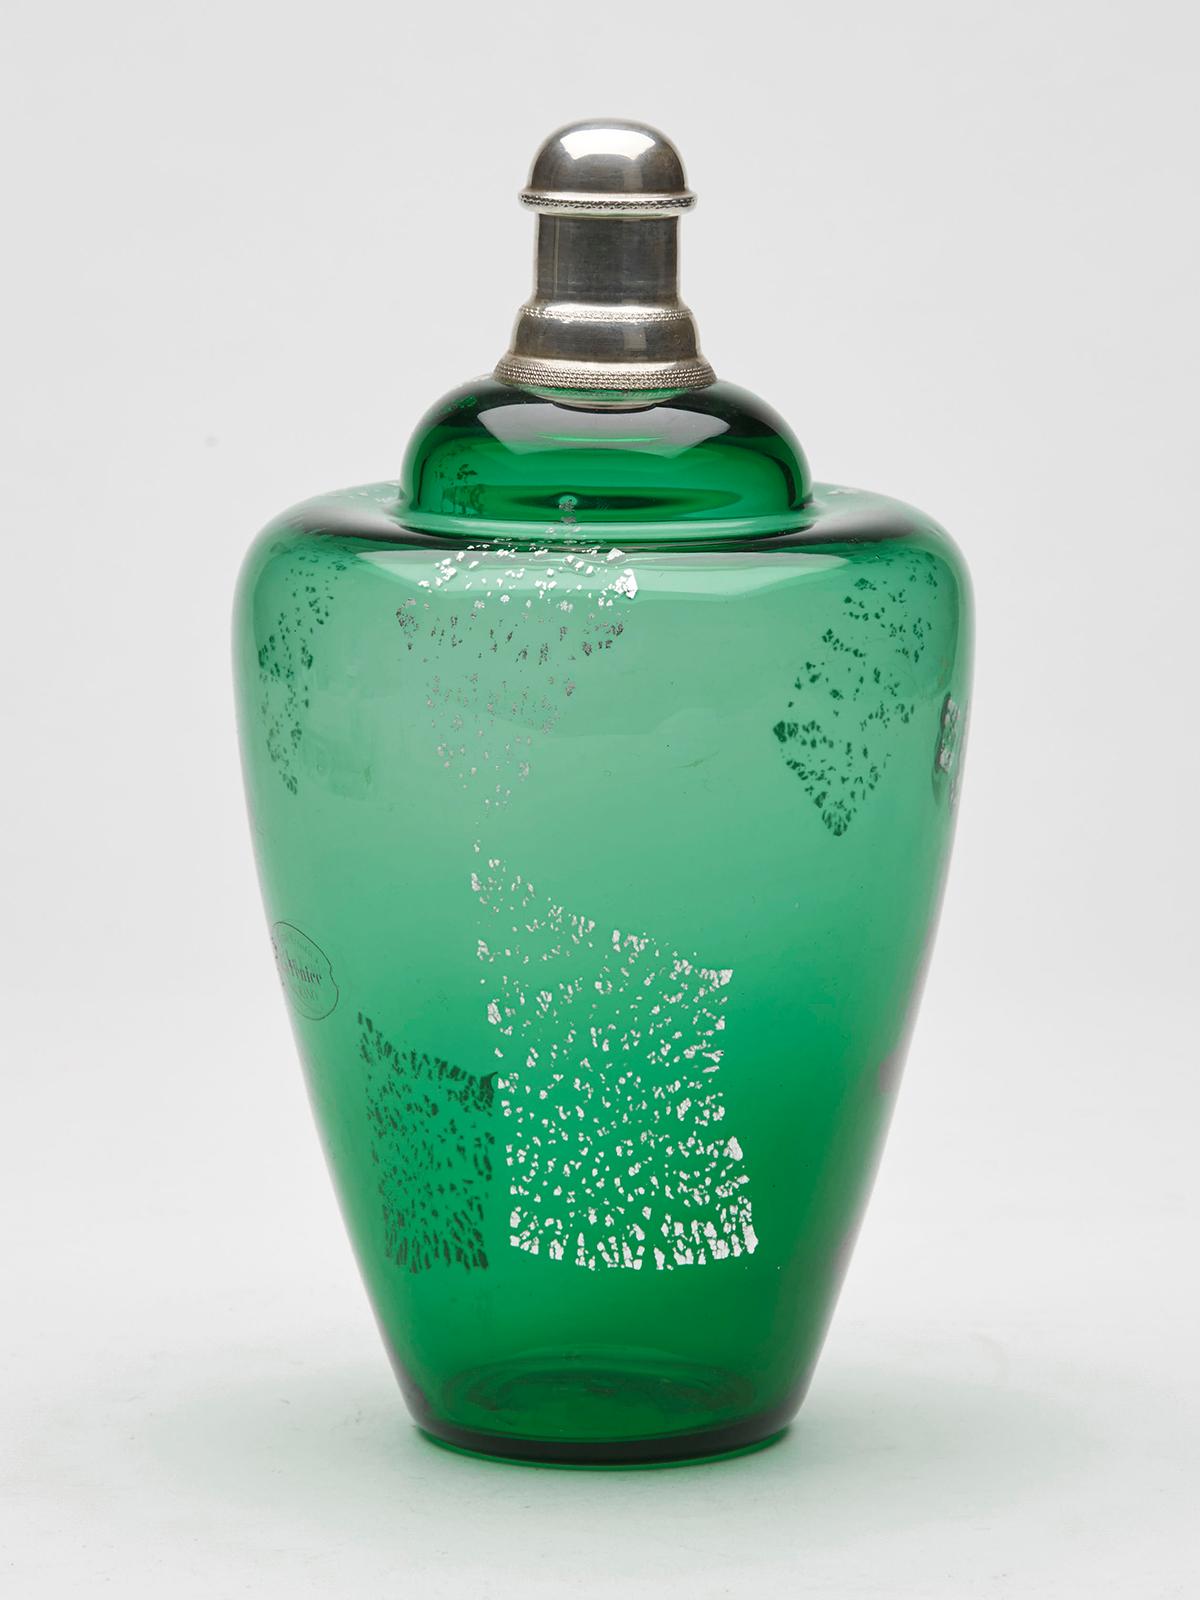 A stylish vintage La Fenice, Murano green glass cologne bottle with silver mounted top and screw cover and with silver aventrine inclusions running through the green glass body by Veteria Artistica La Fenice and probably darting from around 1960.